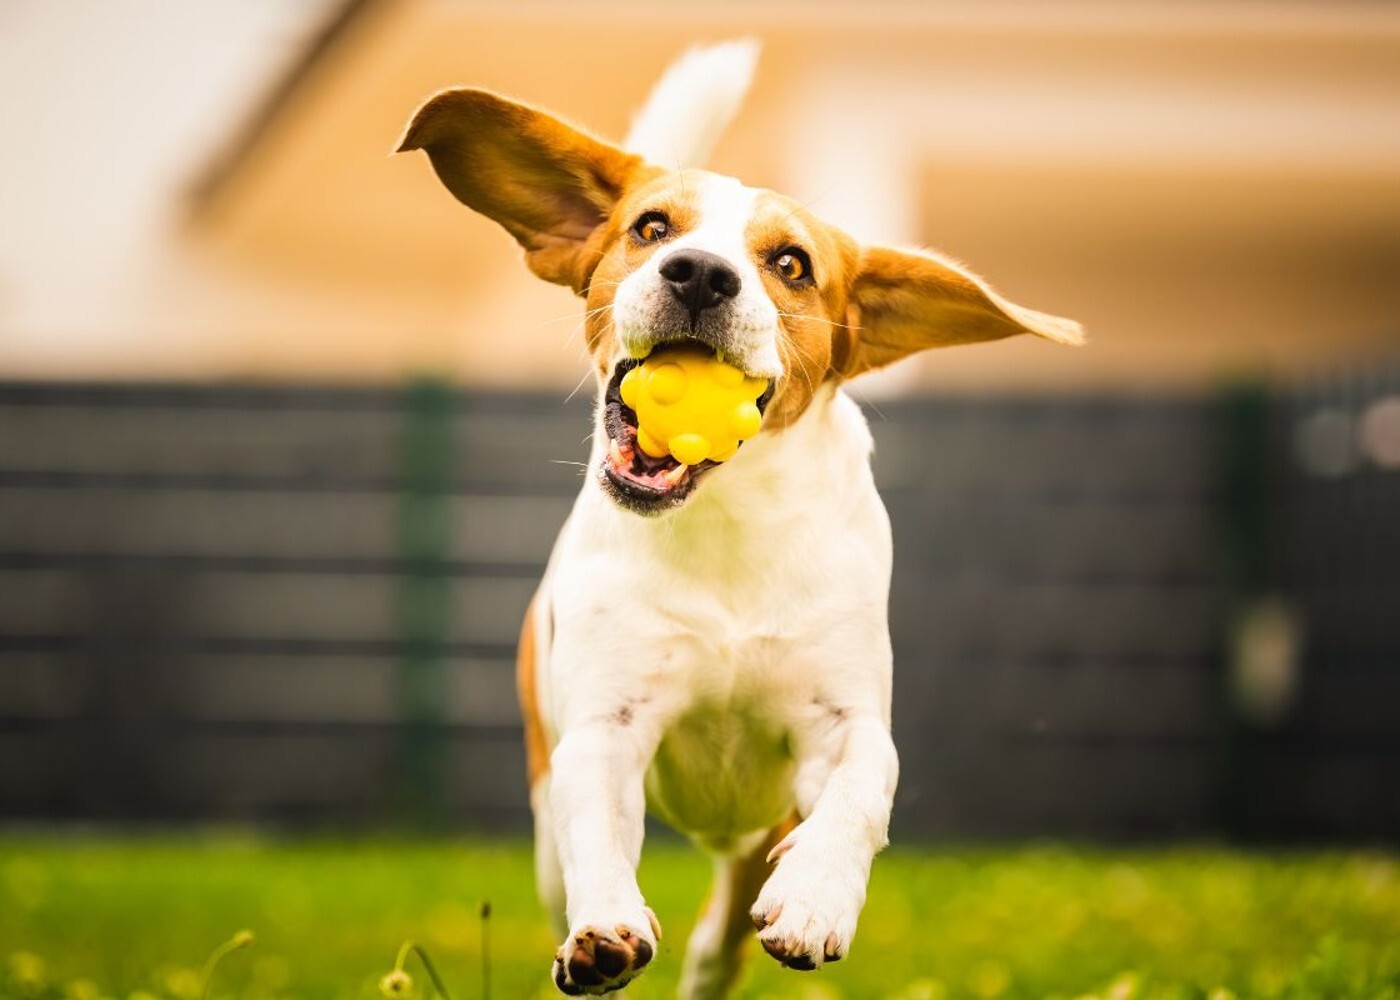 A dog with training from Dog Training Elite happily running with a ball in its mouth.